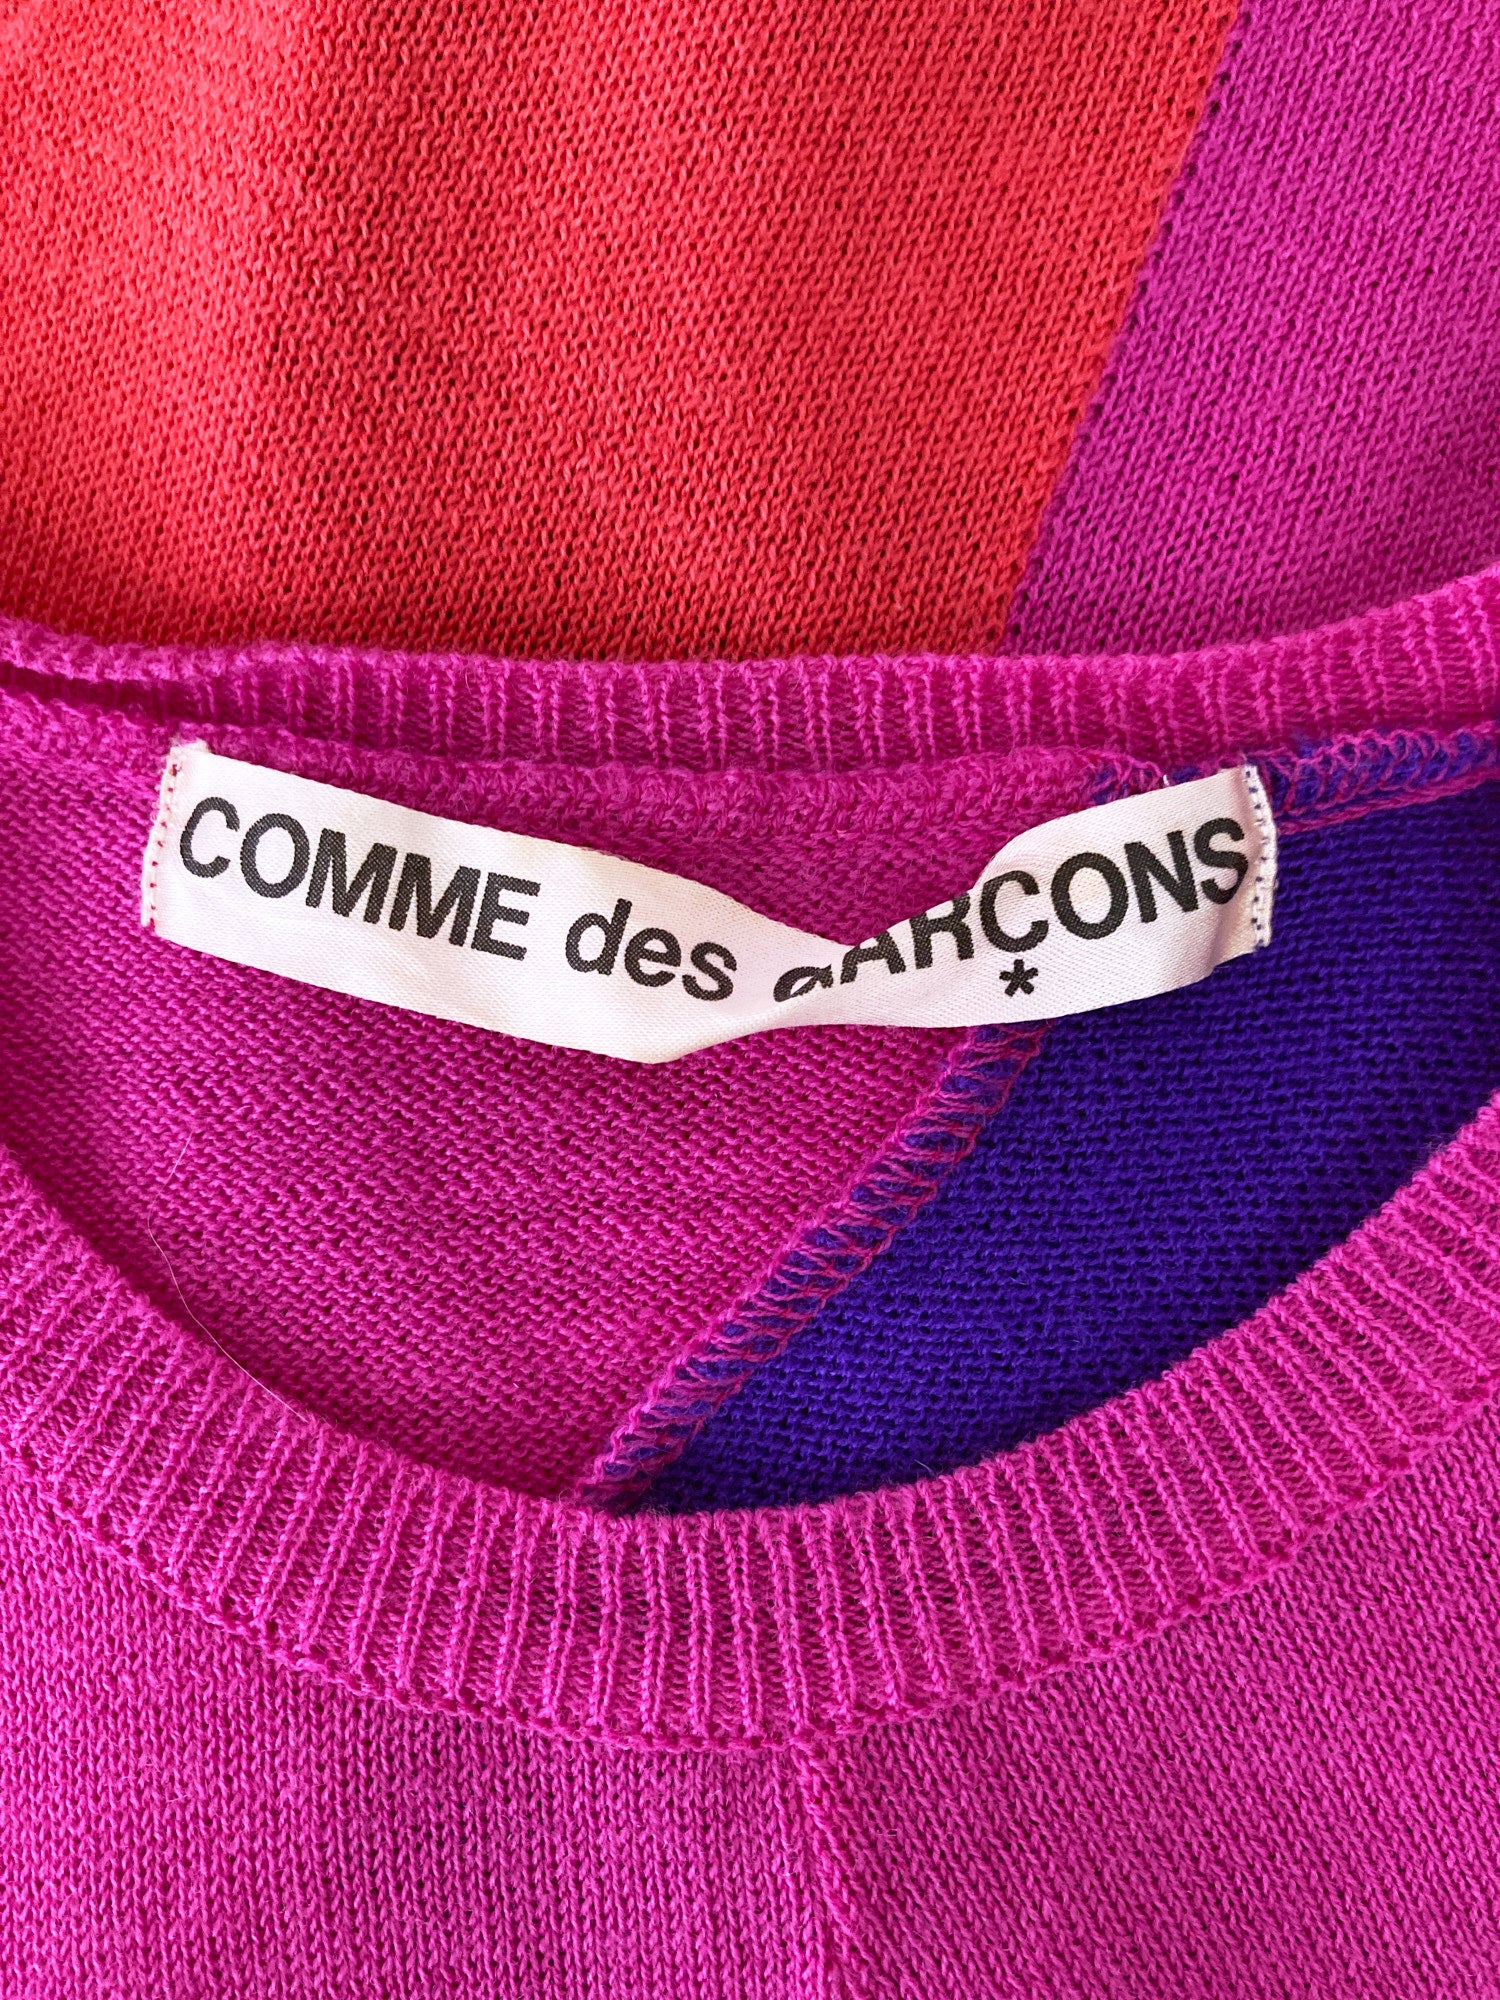 Comme des Garcons SS1996 multicolour wool paneled short sleeve sweater